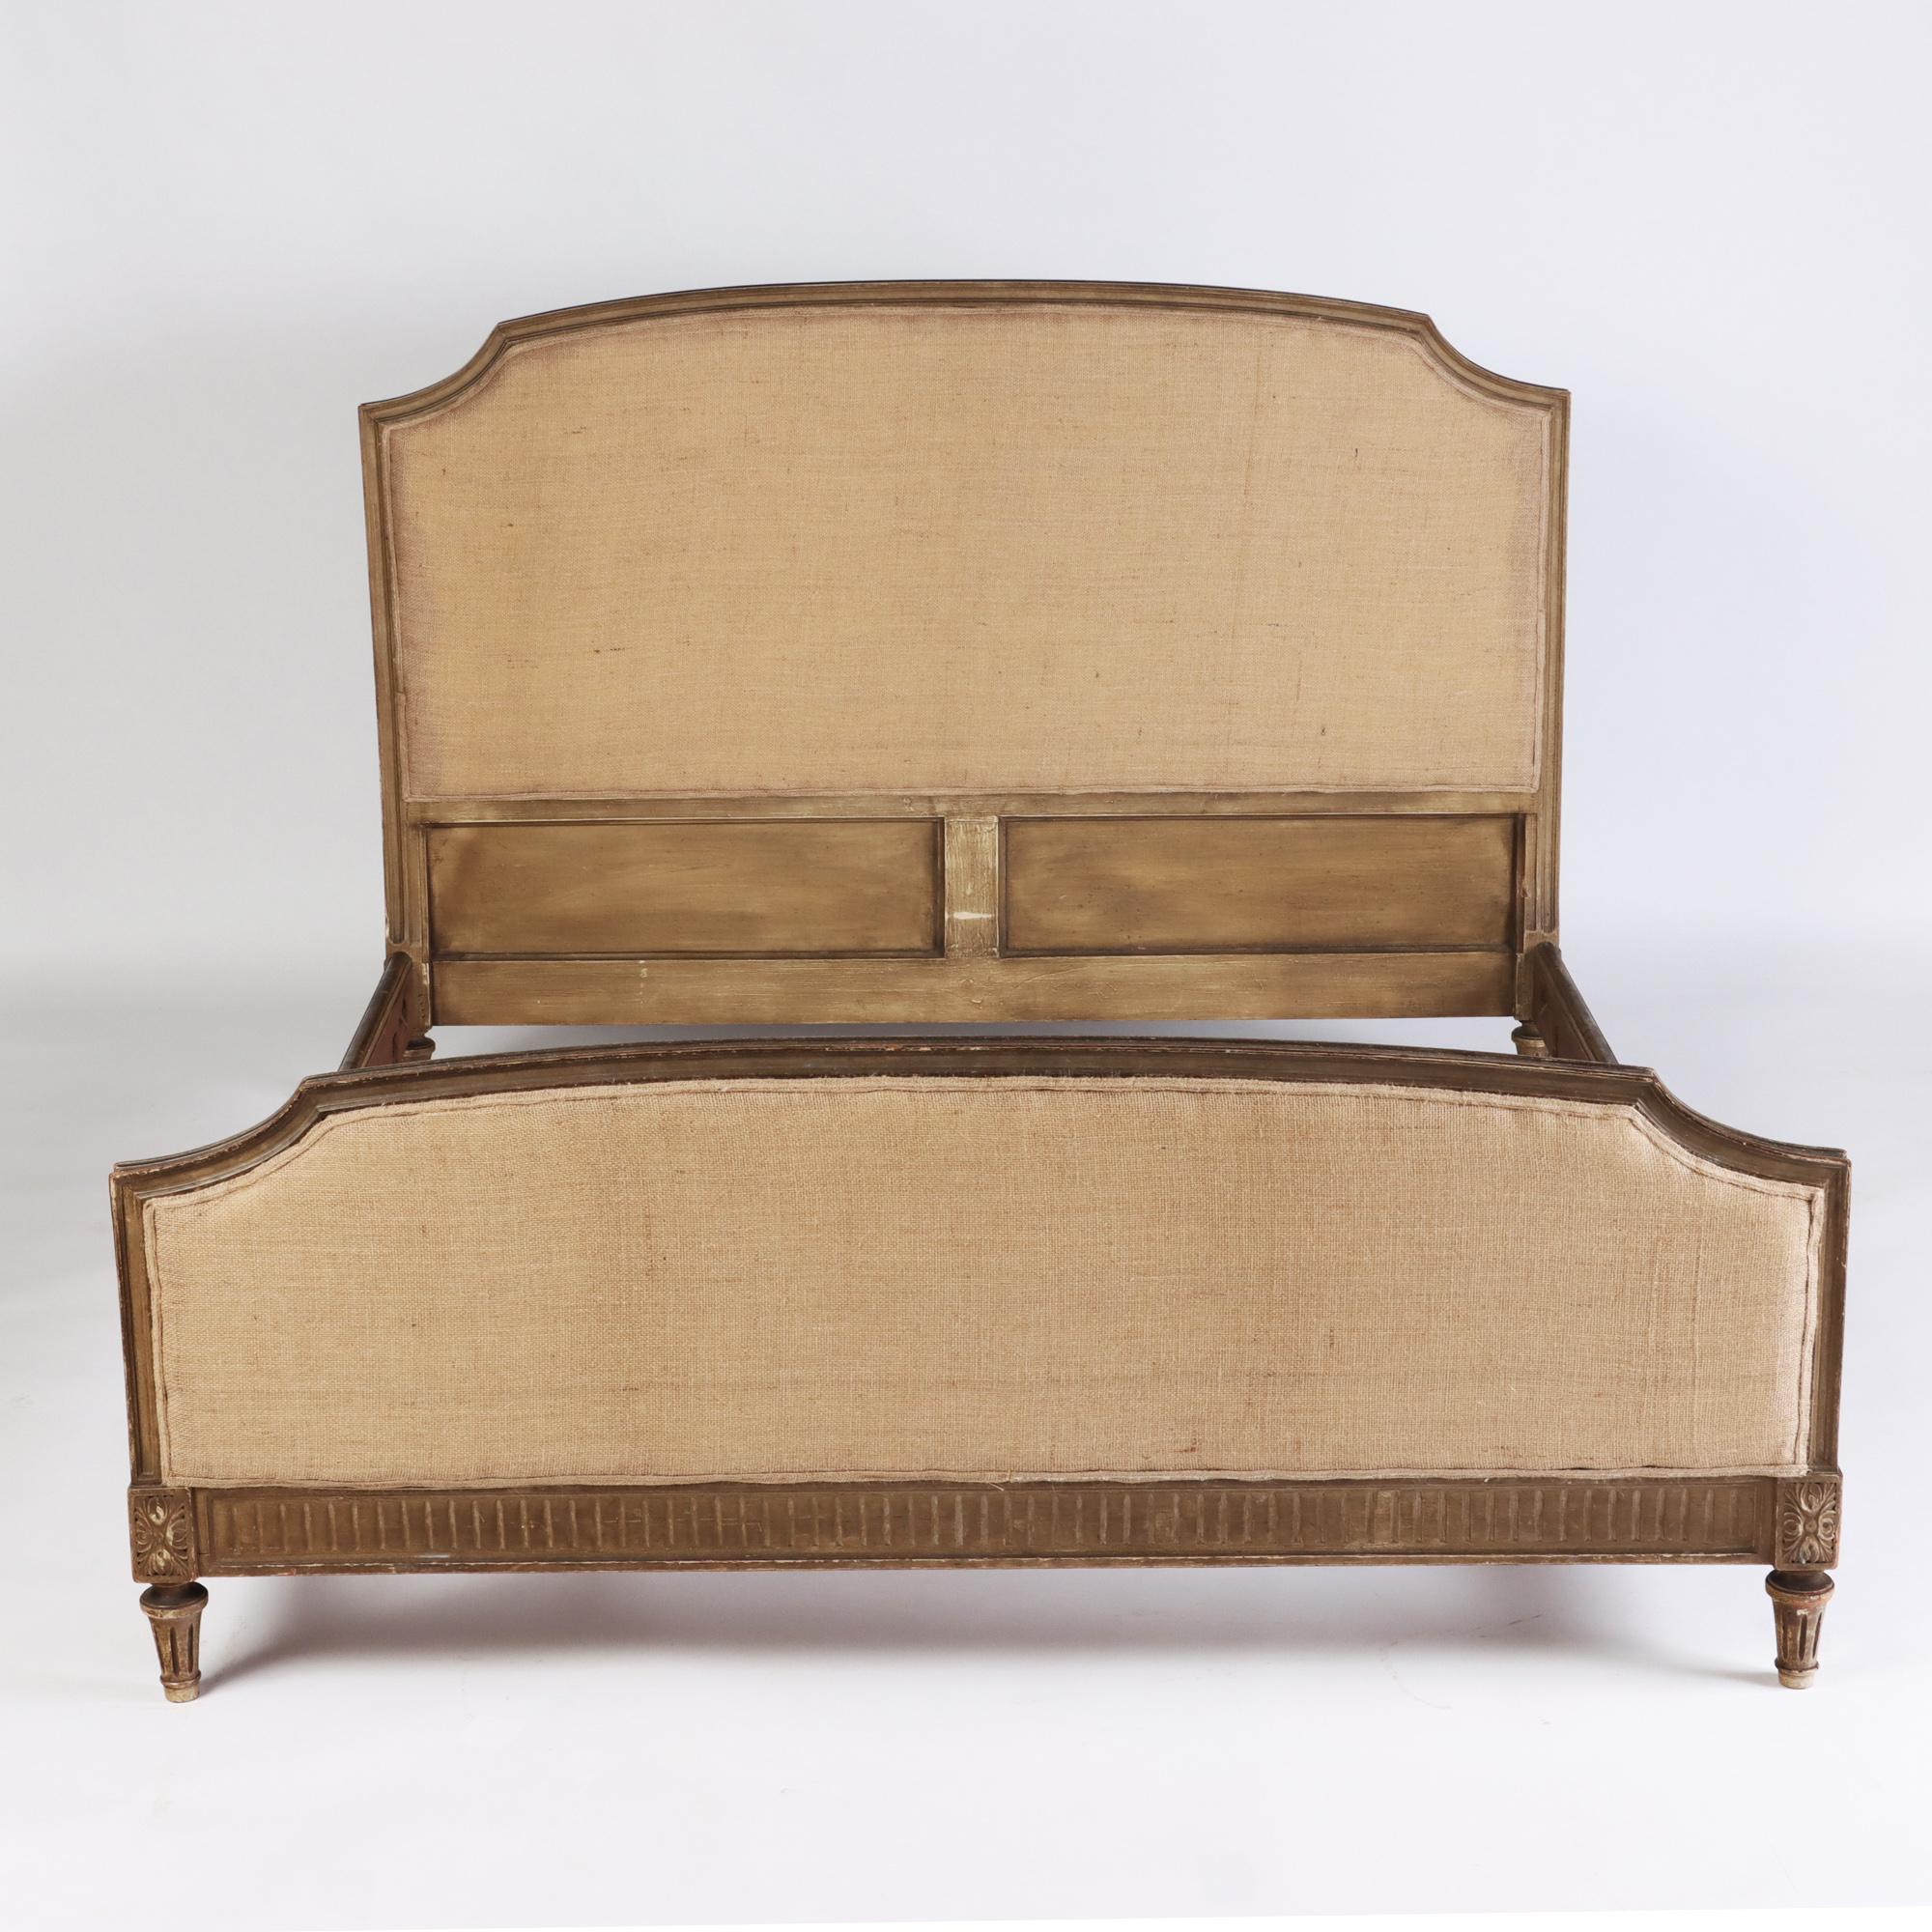 A French Louis XVI style Queen size bed with burlap upholstery circa 1940.
 Interior dimensions: 63.5